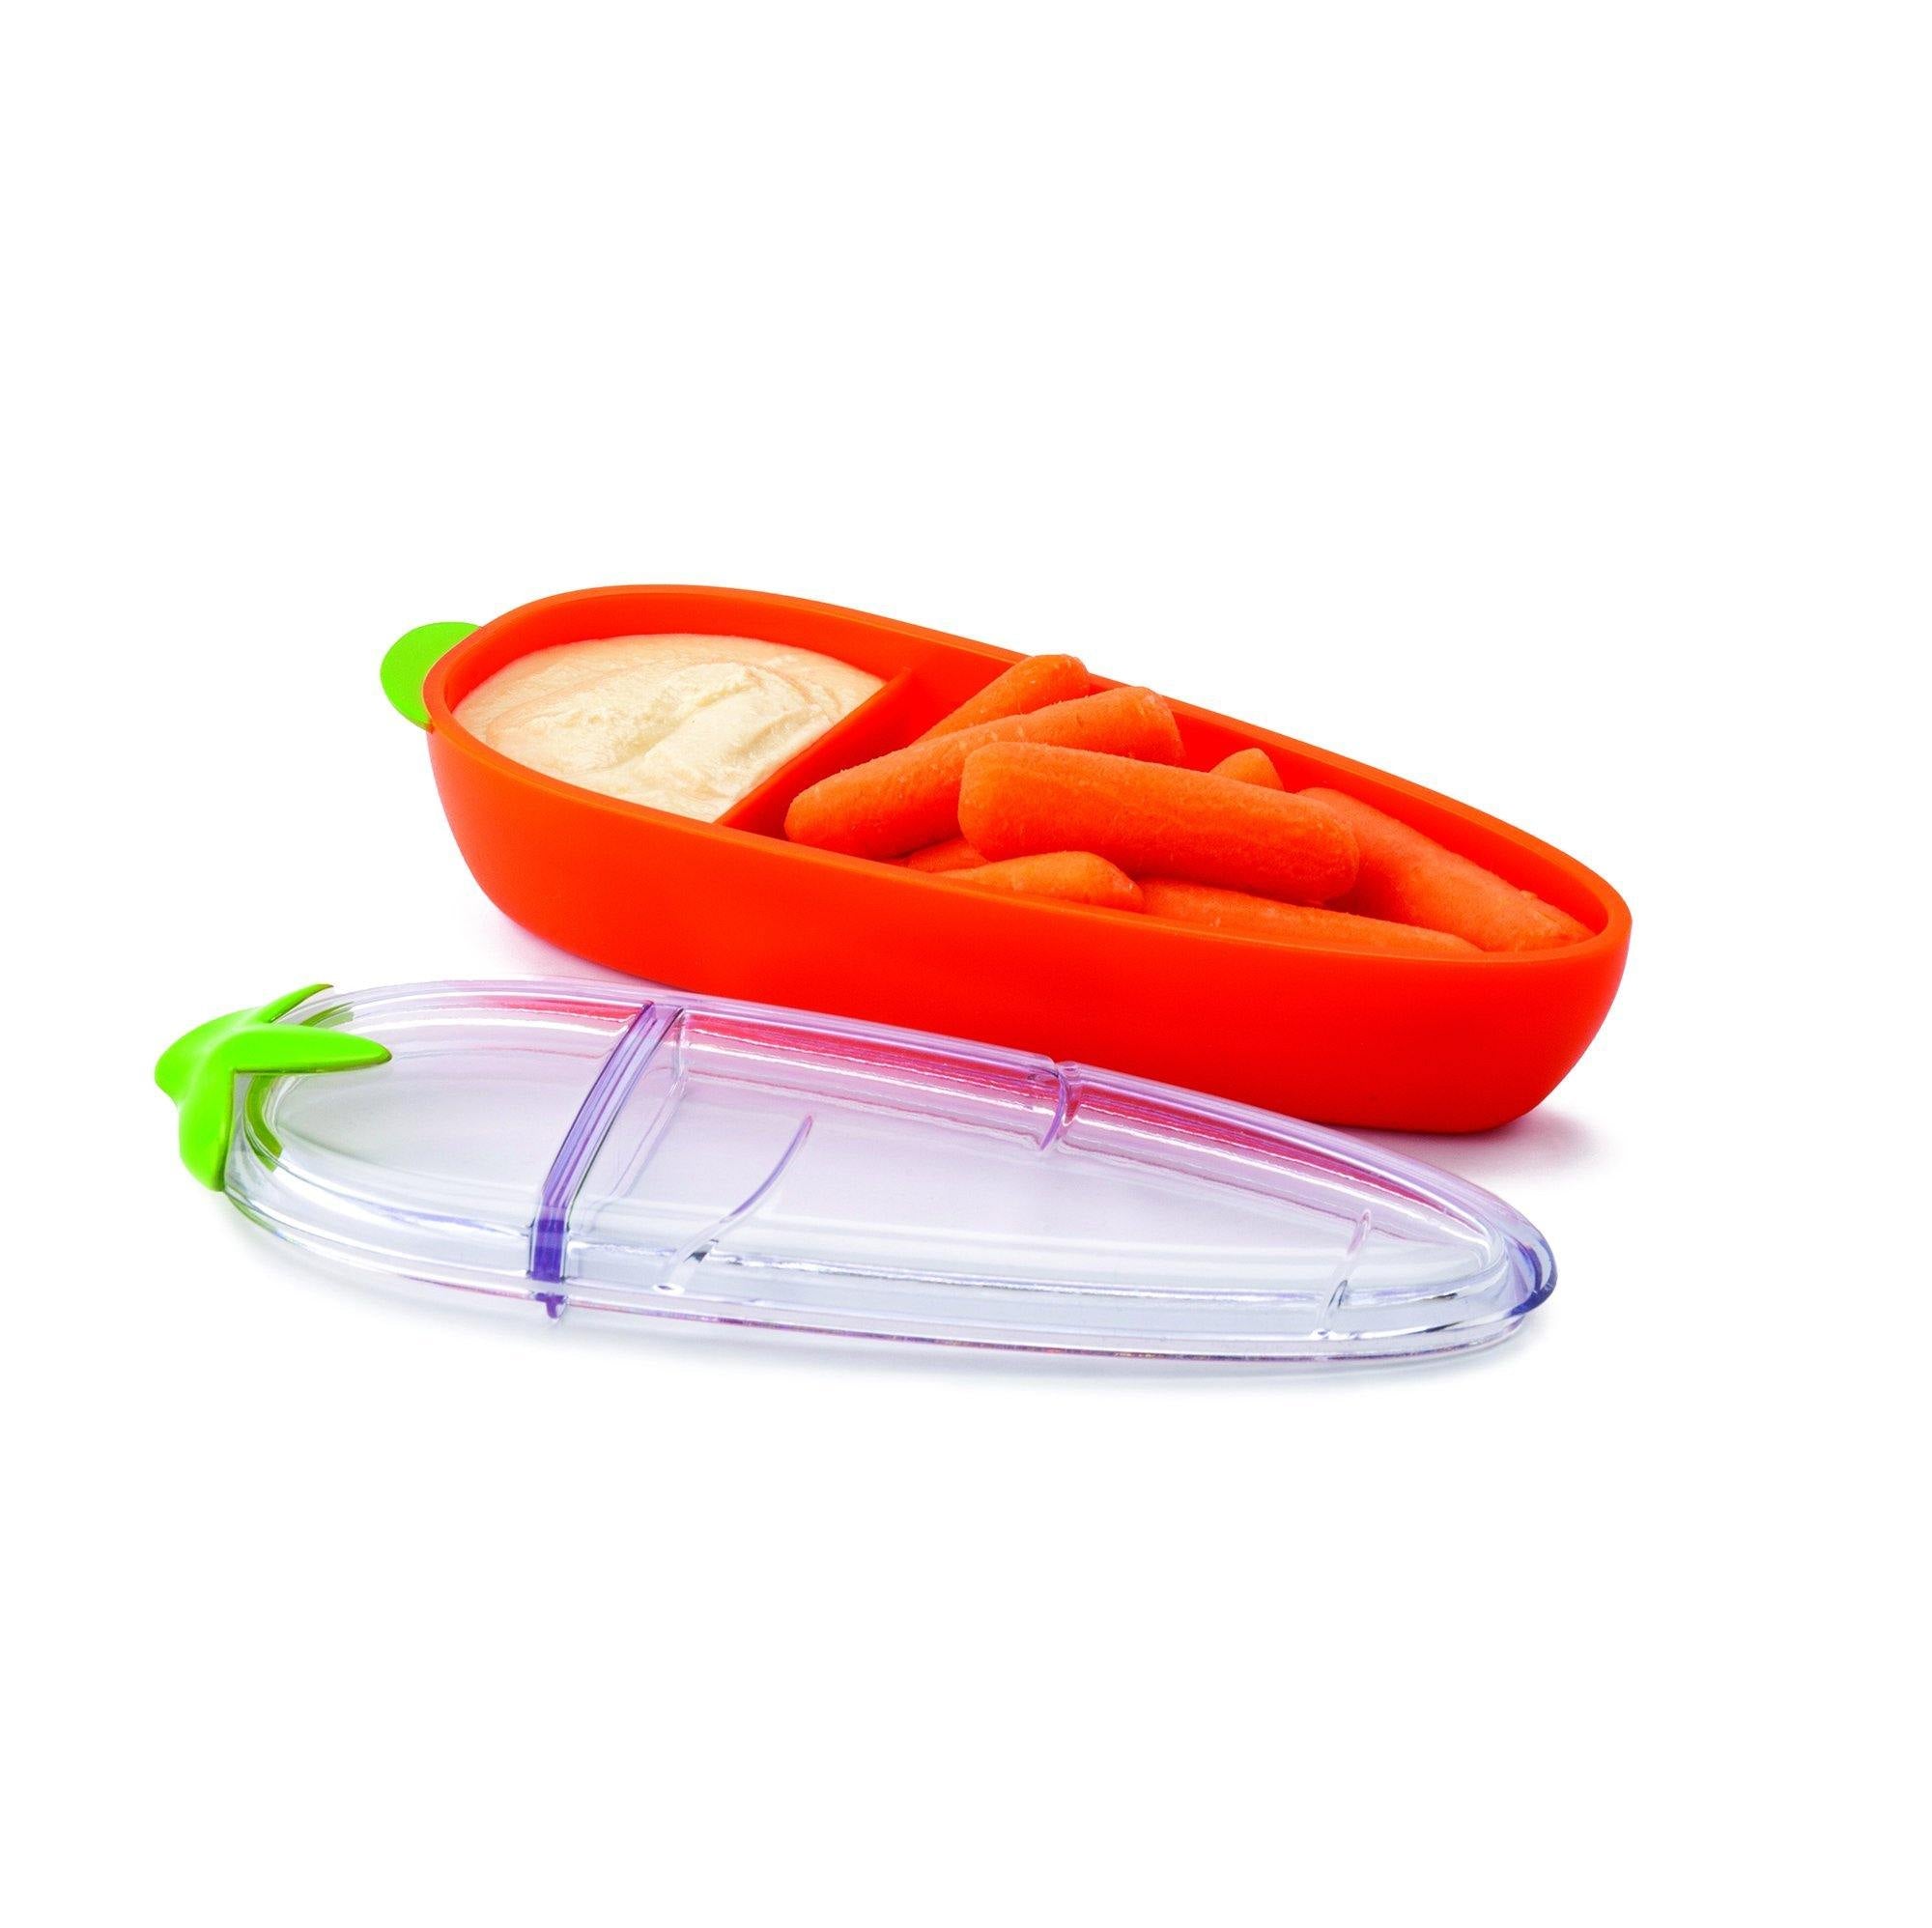 Joie Snack and Dip Container Carrot Shaped Plastic 7x2.5x1.5in